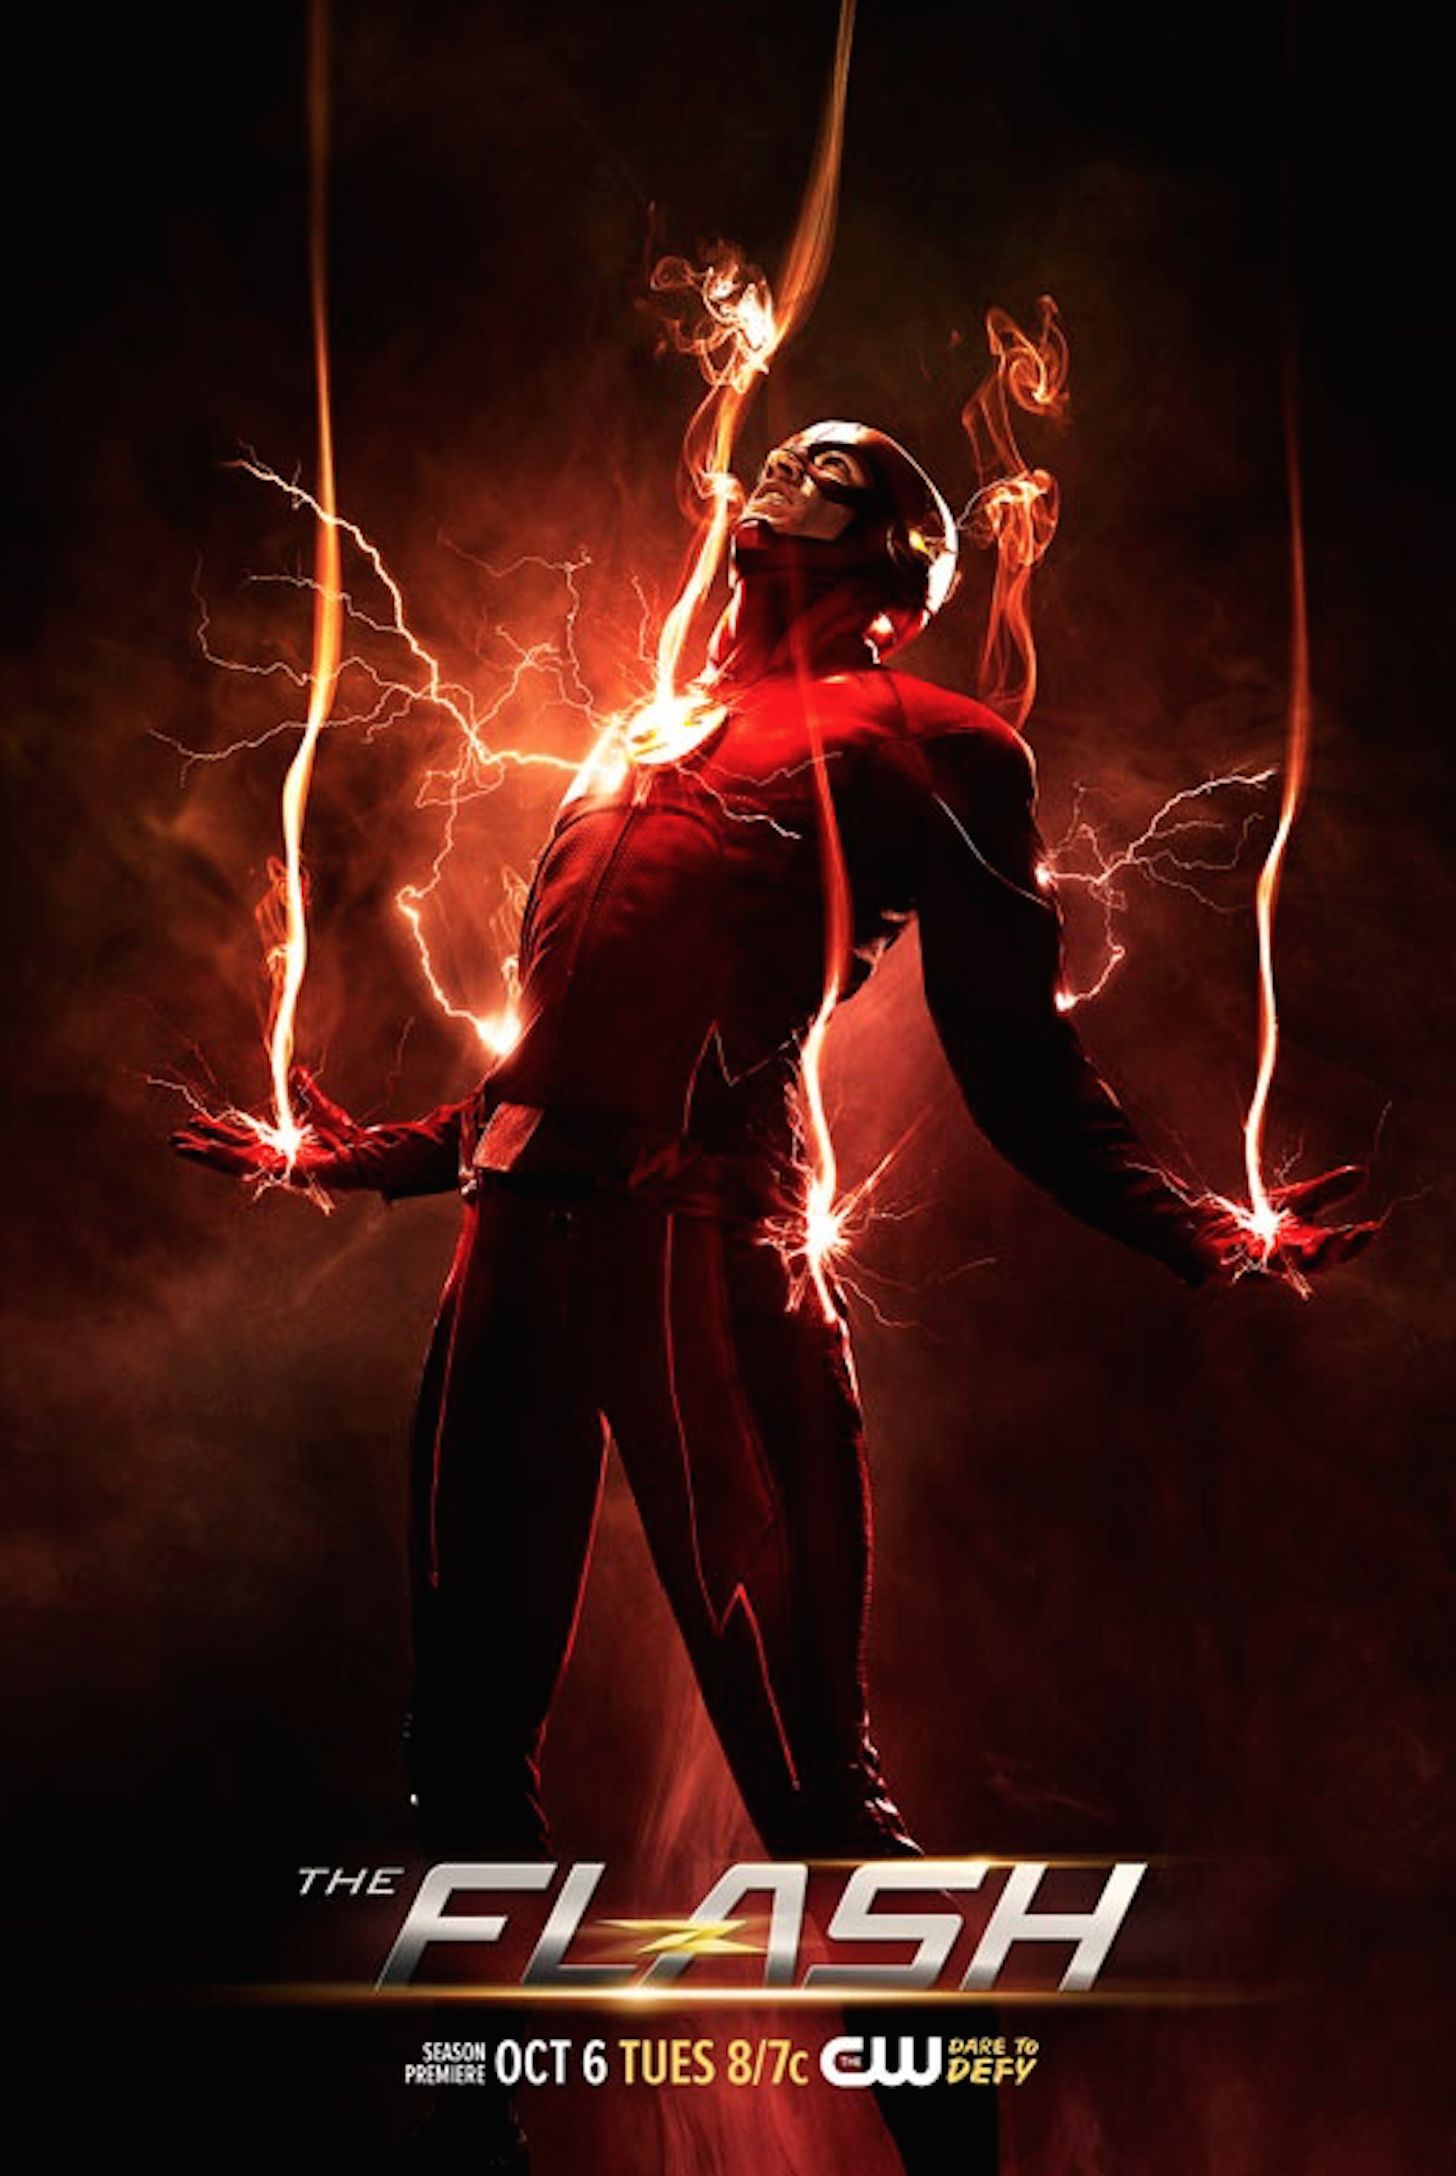 New Poster for The Flash Season 2